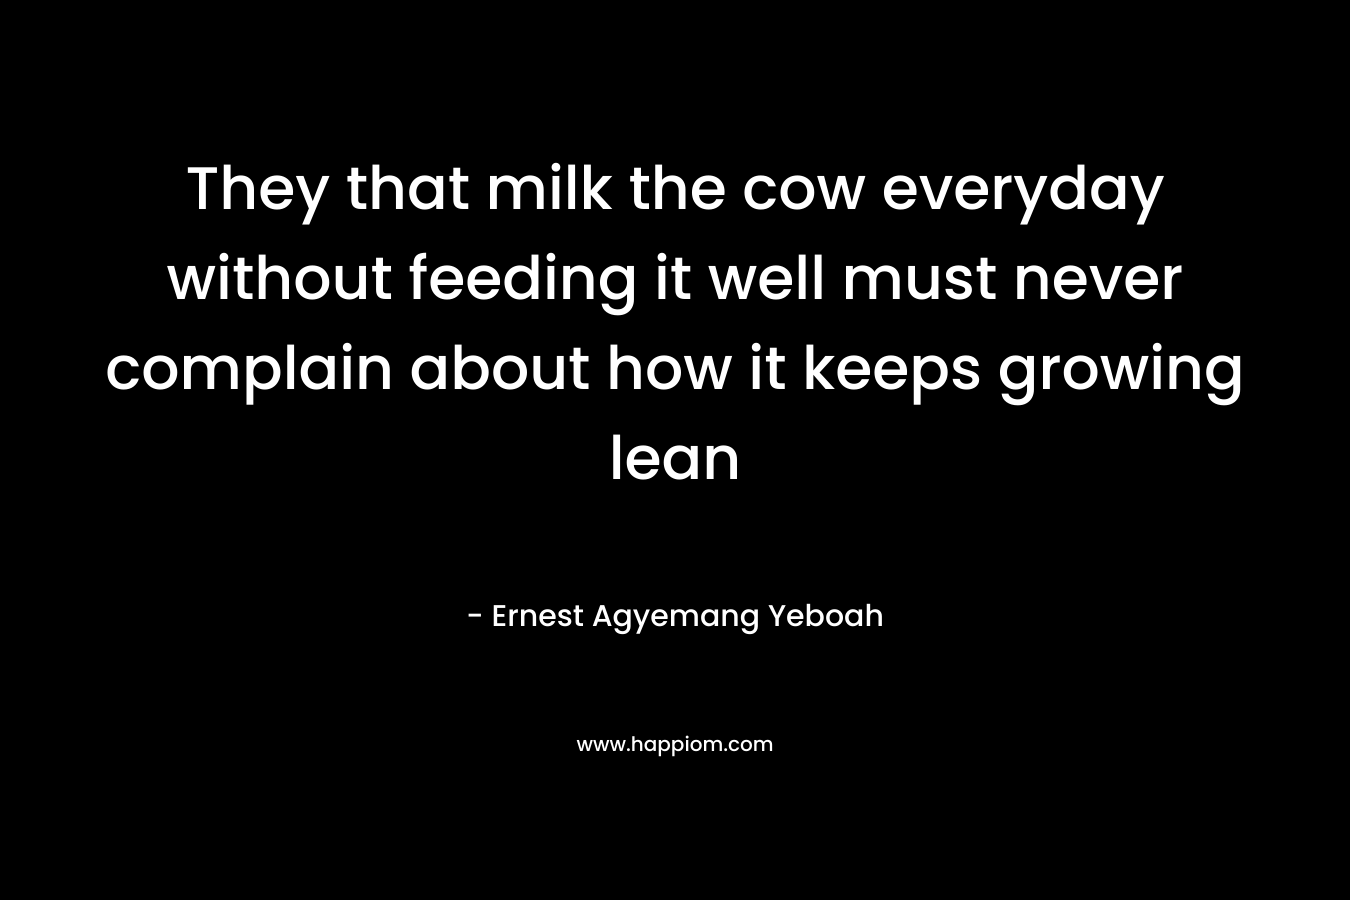 They that milk the cow everyday without feeding it well must never complain about how it keeps growing lean – Ernest Agyemang Yeboah